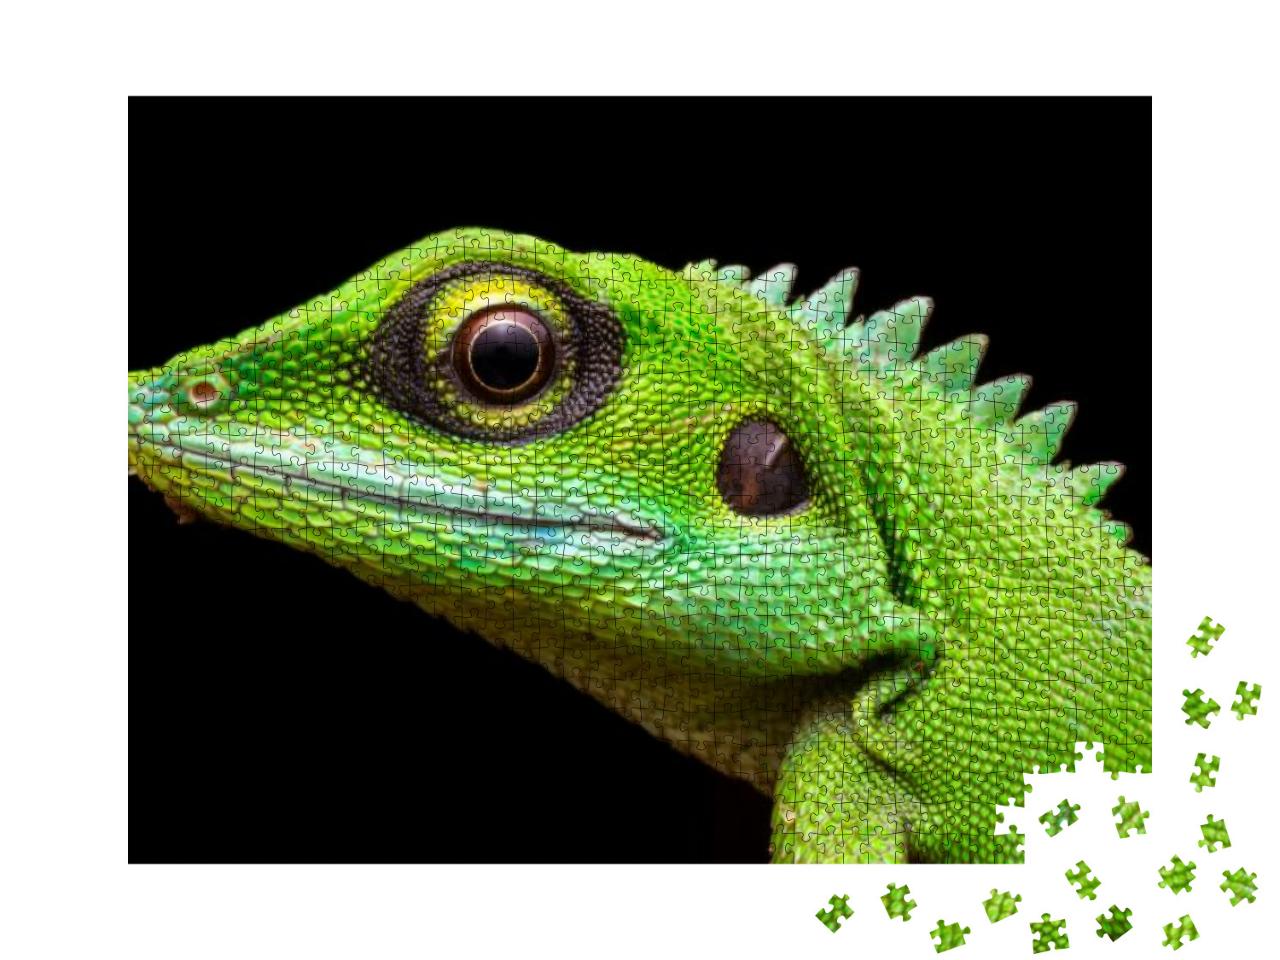 Head Shot Closeup of Green Crested Lizard... Jigsaw Puzzle with 1000 pieces